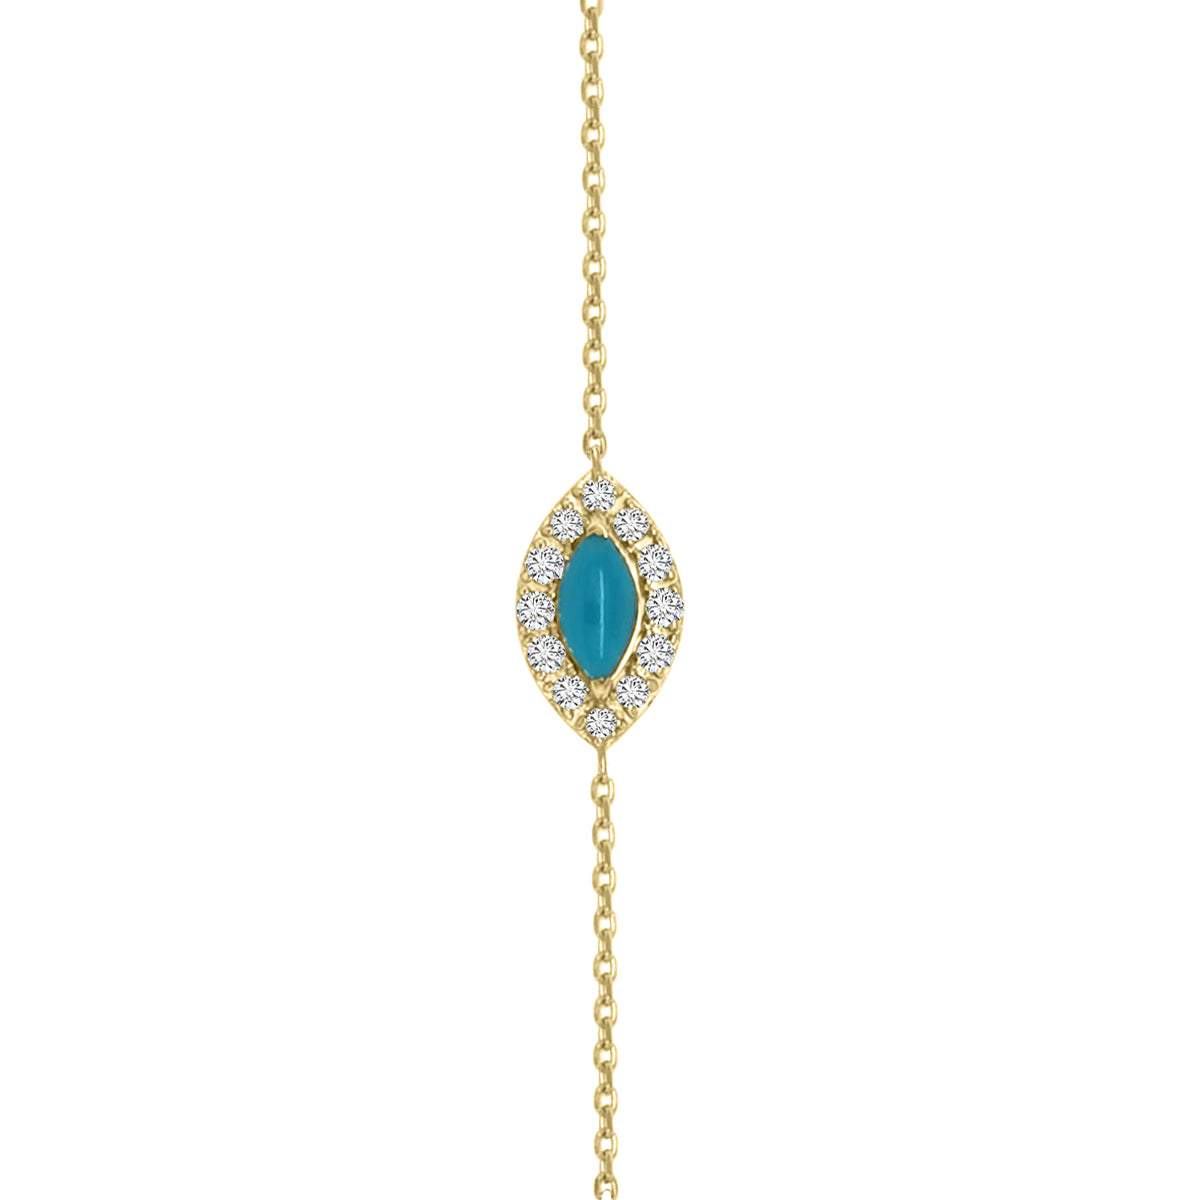 Diamond And Turquoise Bracelet In 18k Yellow Gold.